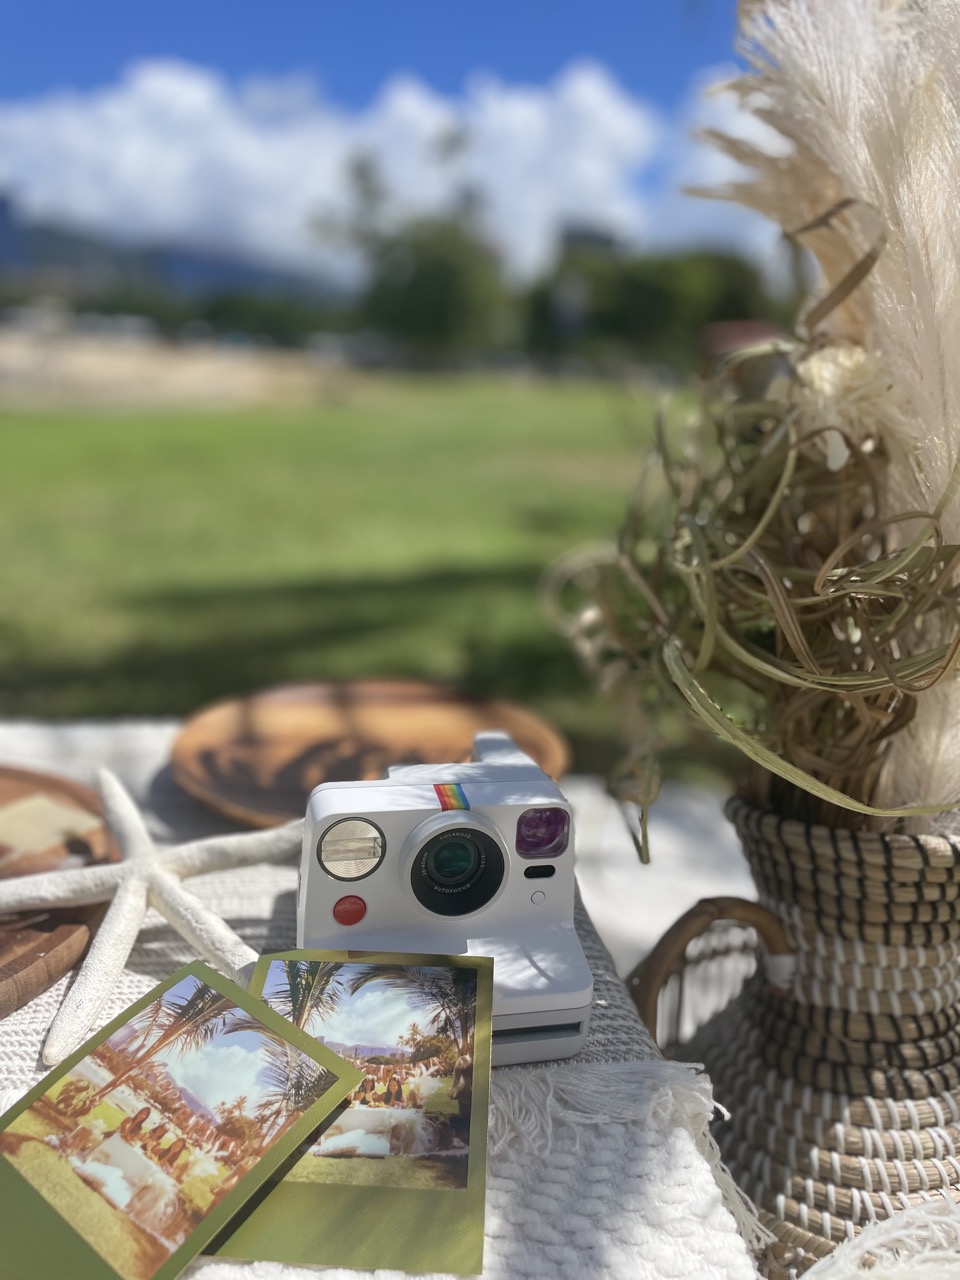 Where to have a picnic when you are in Hawaii?